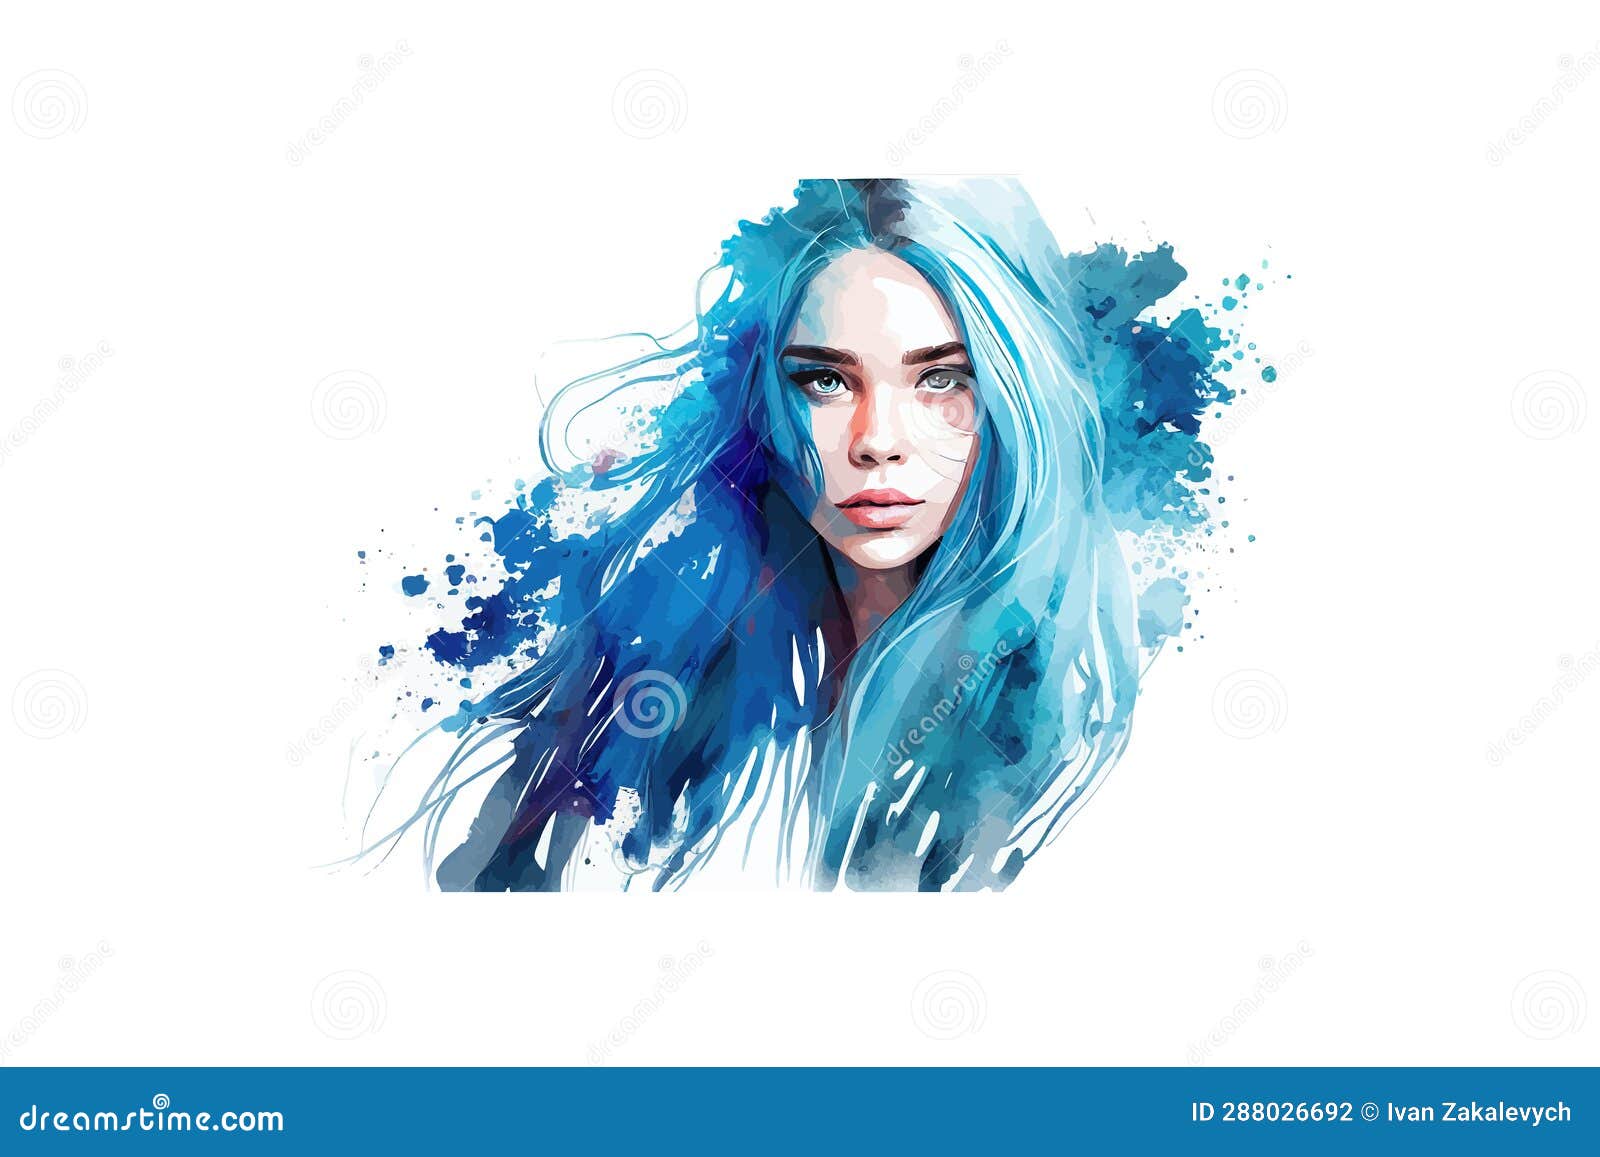 Blue Hair Animation - wide 3